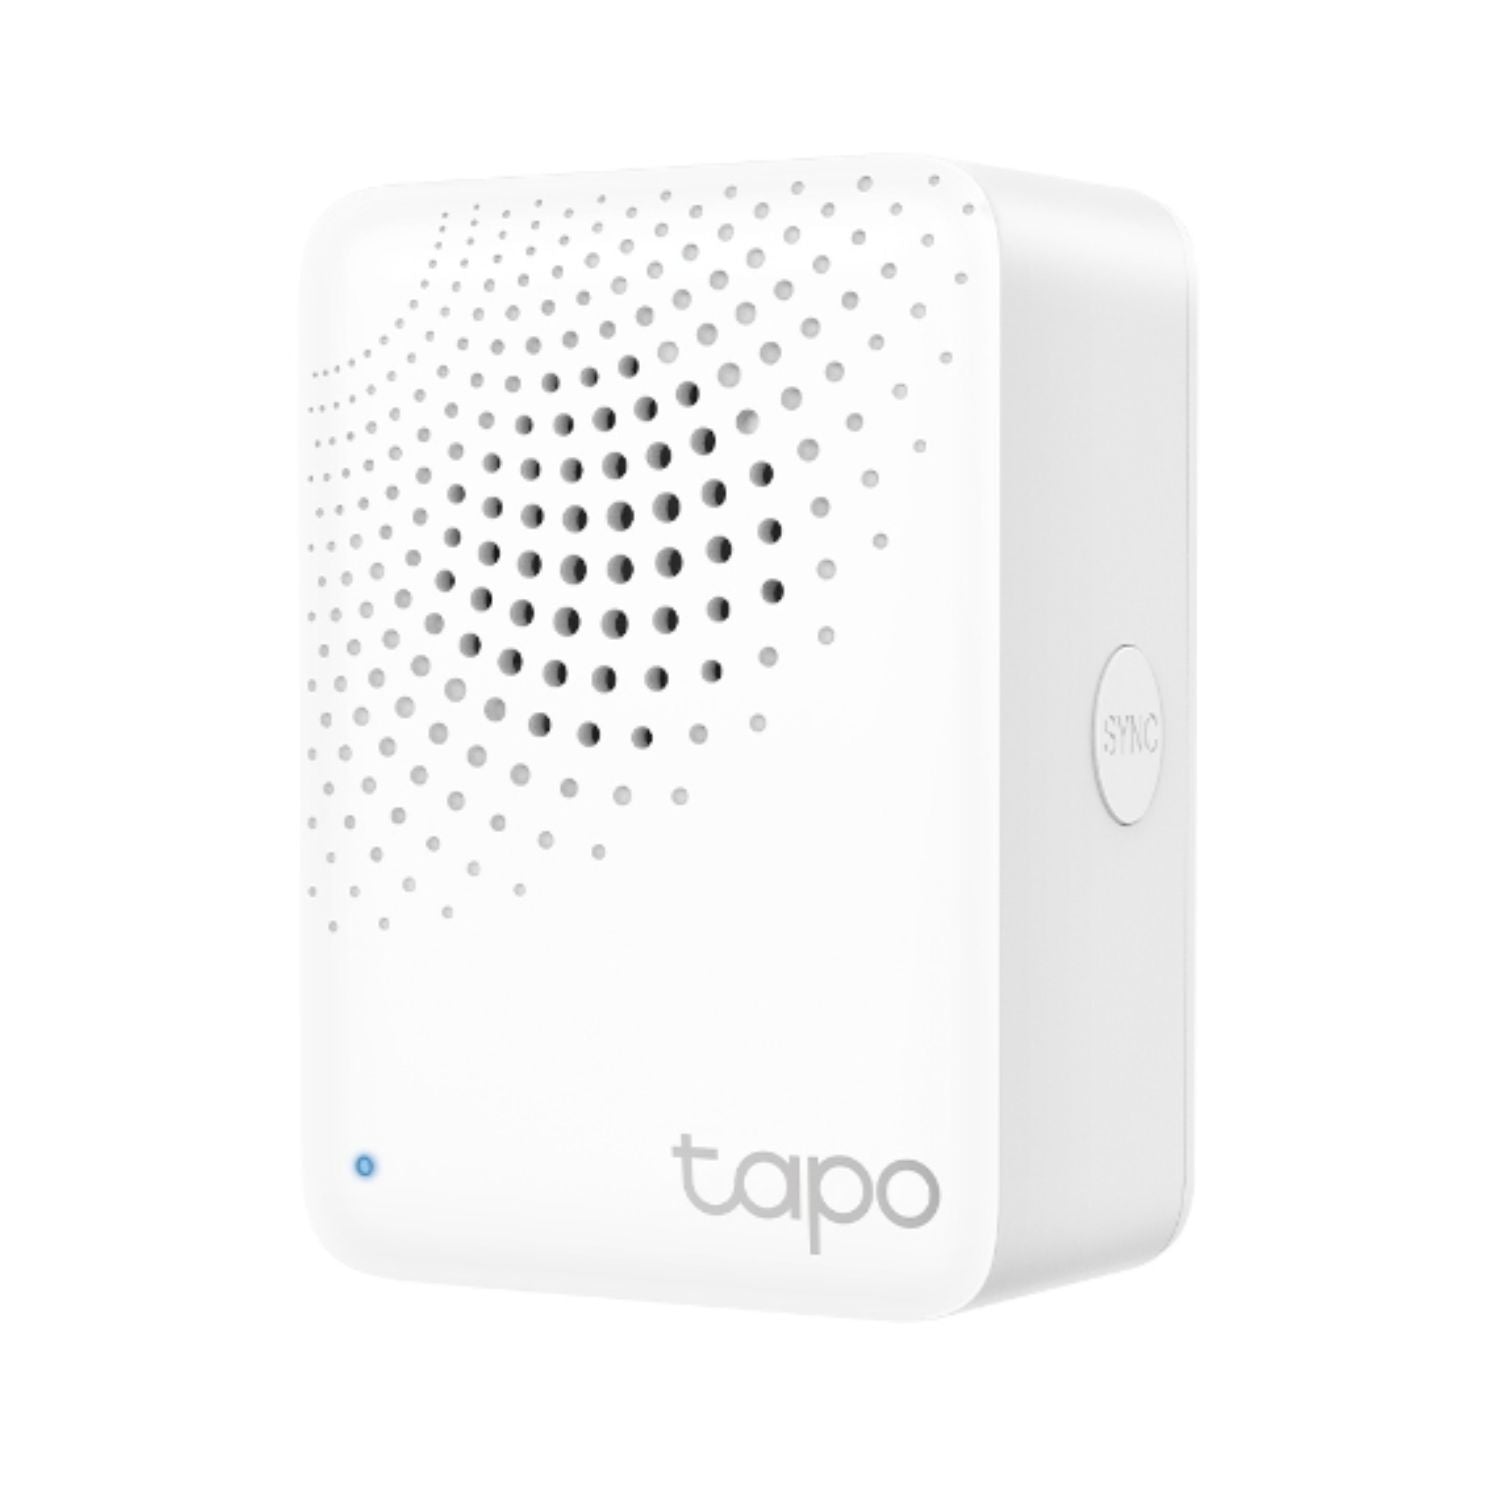 TP-Link Tapo Smart IoT Hub with Chime, Whole-Home Coverage, Low-Power Wireless Protocol , Smart Alarm, Smart Doorbell (Tapo H100）